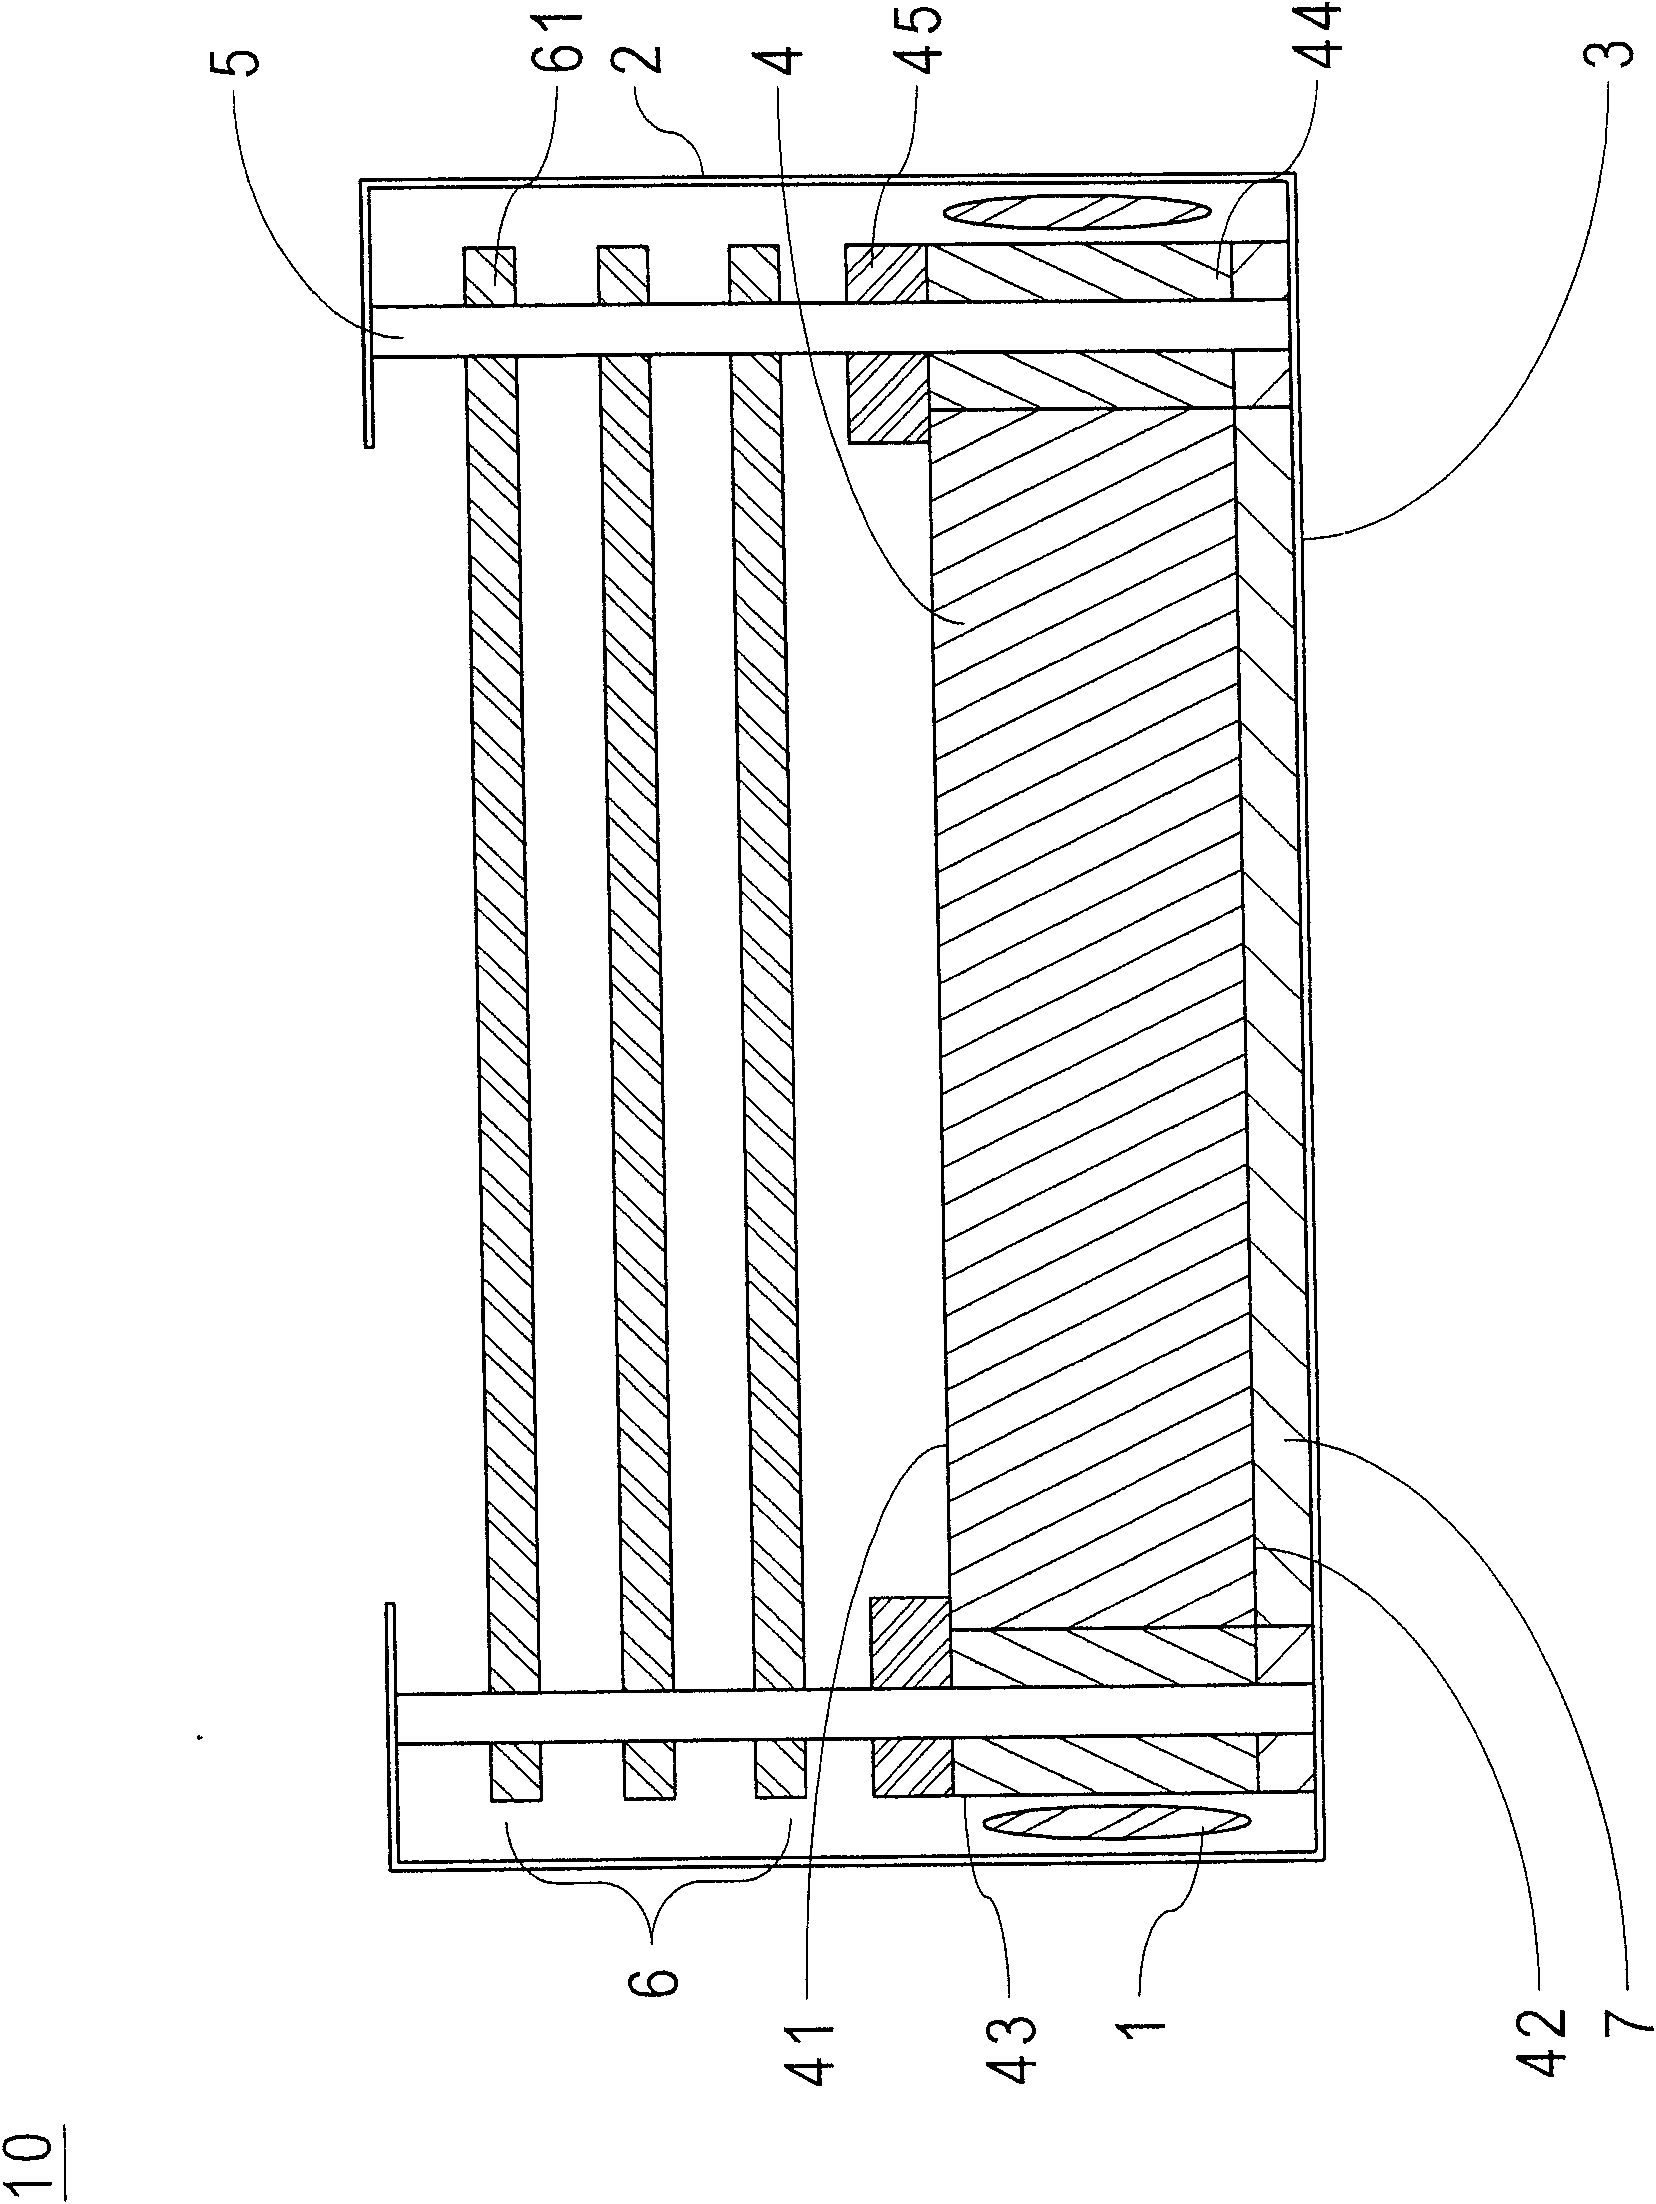 Backlight device of display